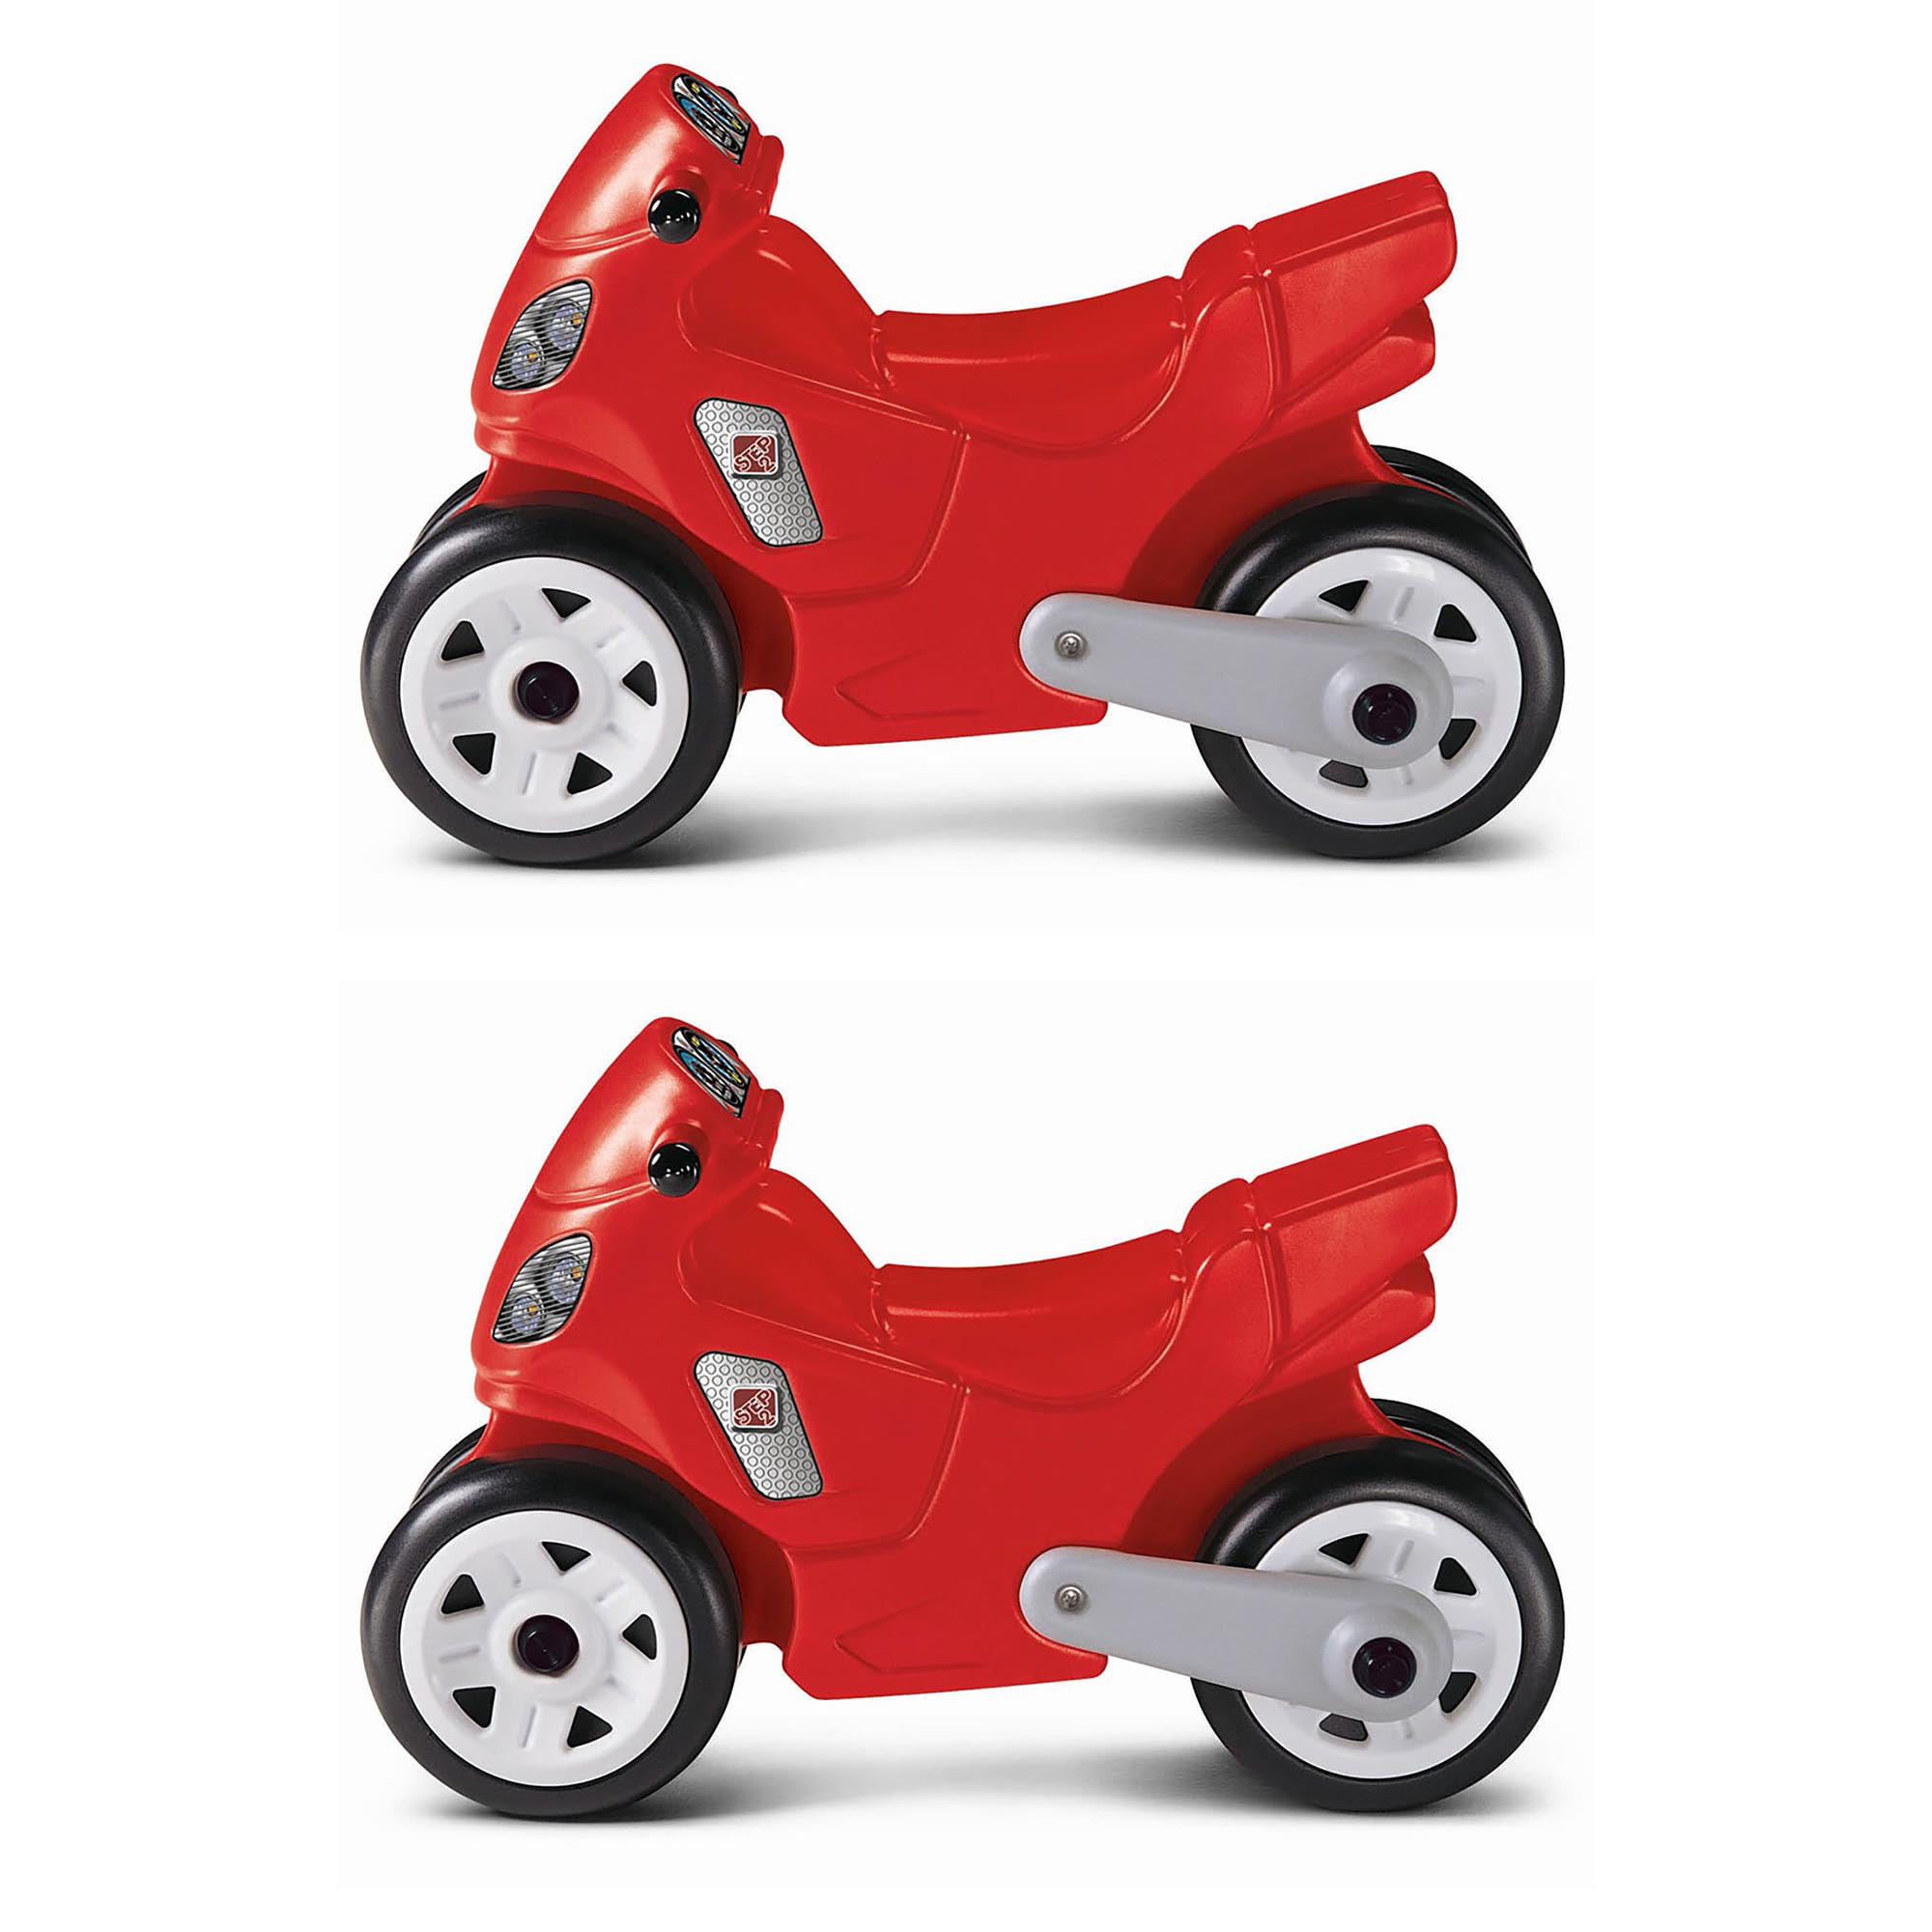 Step2 Motorcycle Red Kids Ride-on Bike Outdoor Play Toy for sale online